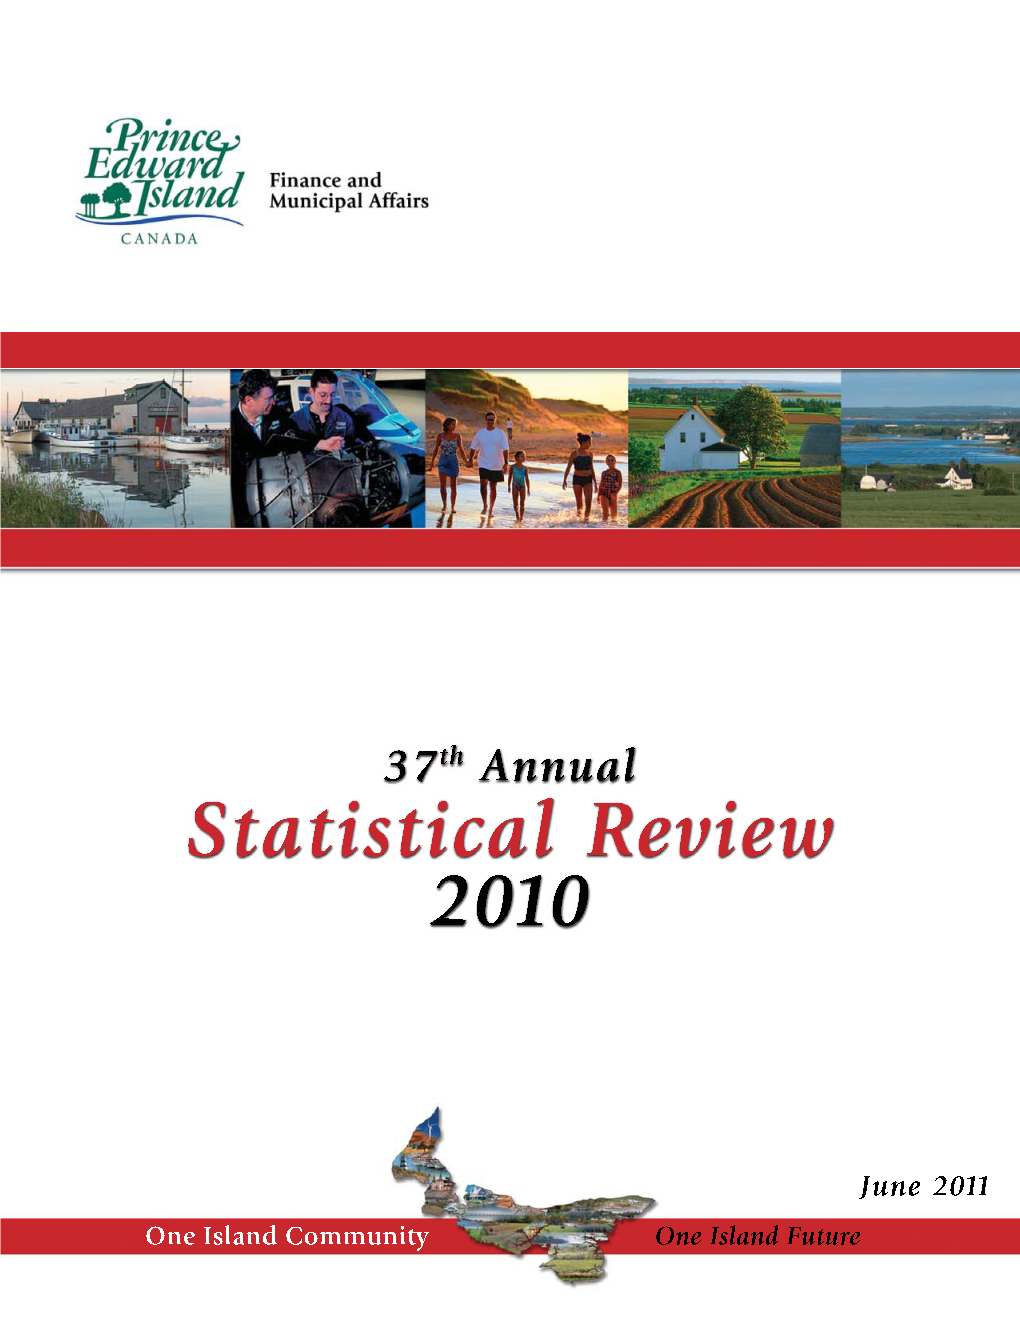 Annual Statistical Review 2010